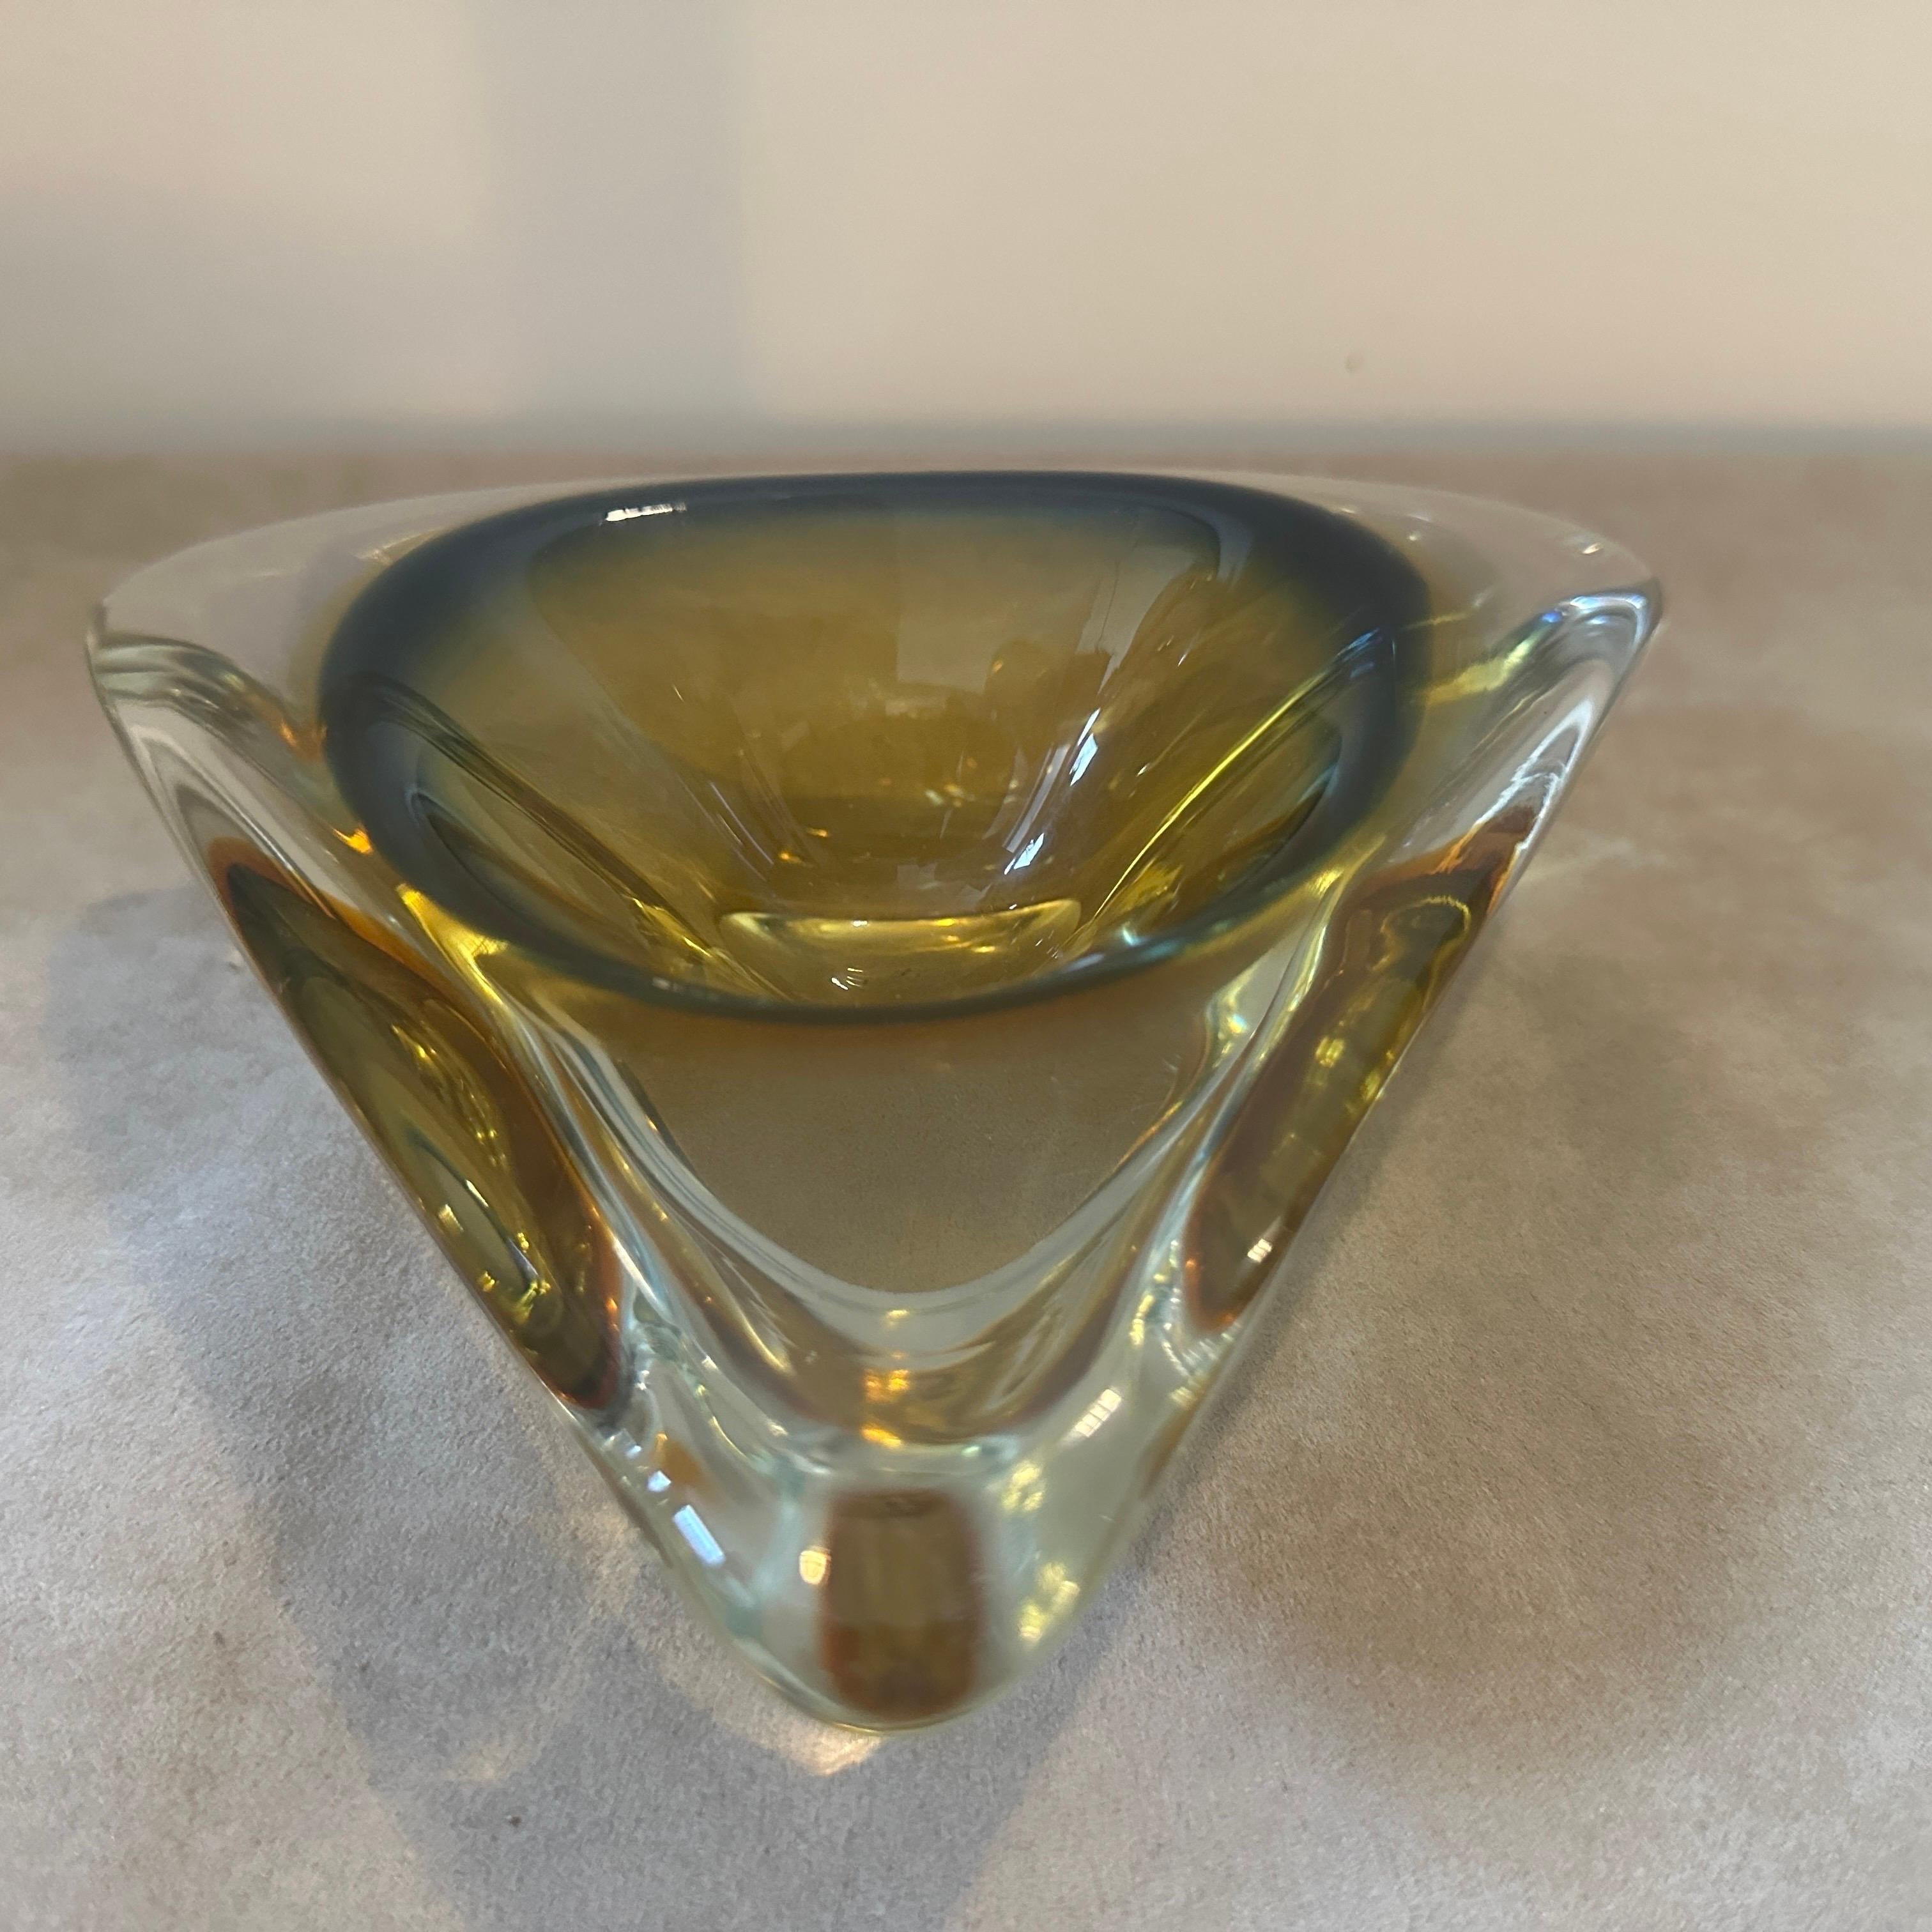 A 1960s Modernist Yellow Green Sommerso Murano Glass Ashtray by Seguso For Sale 2